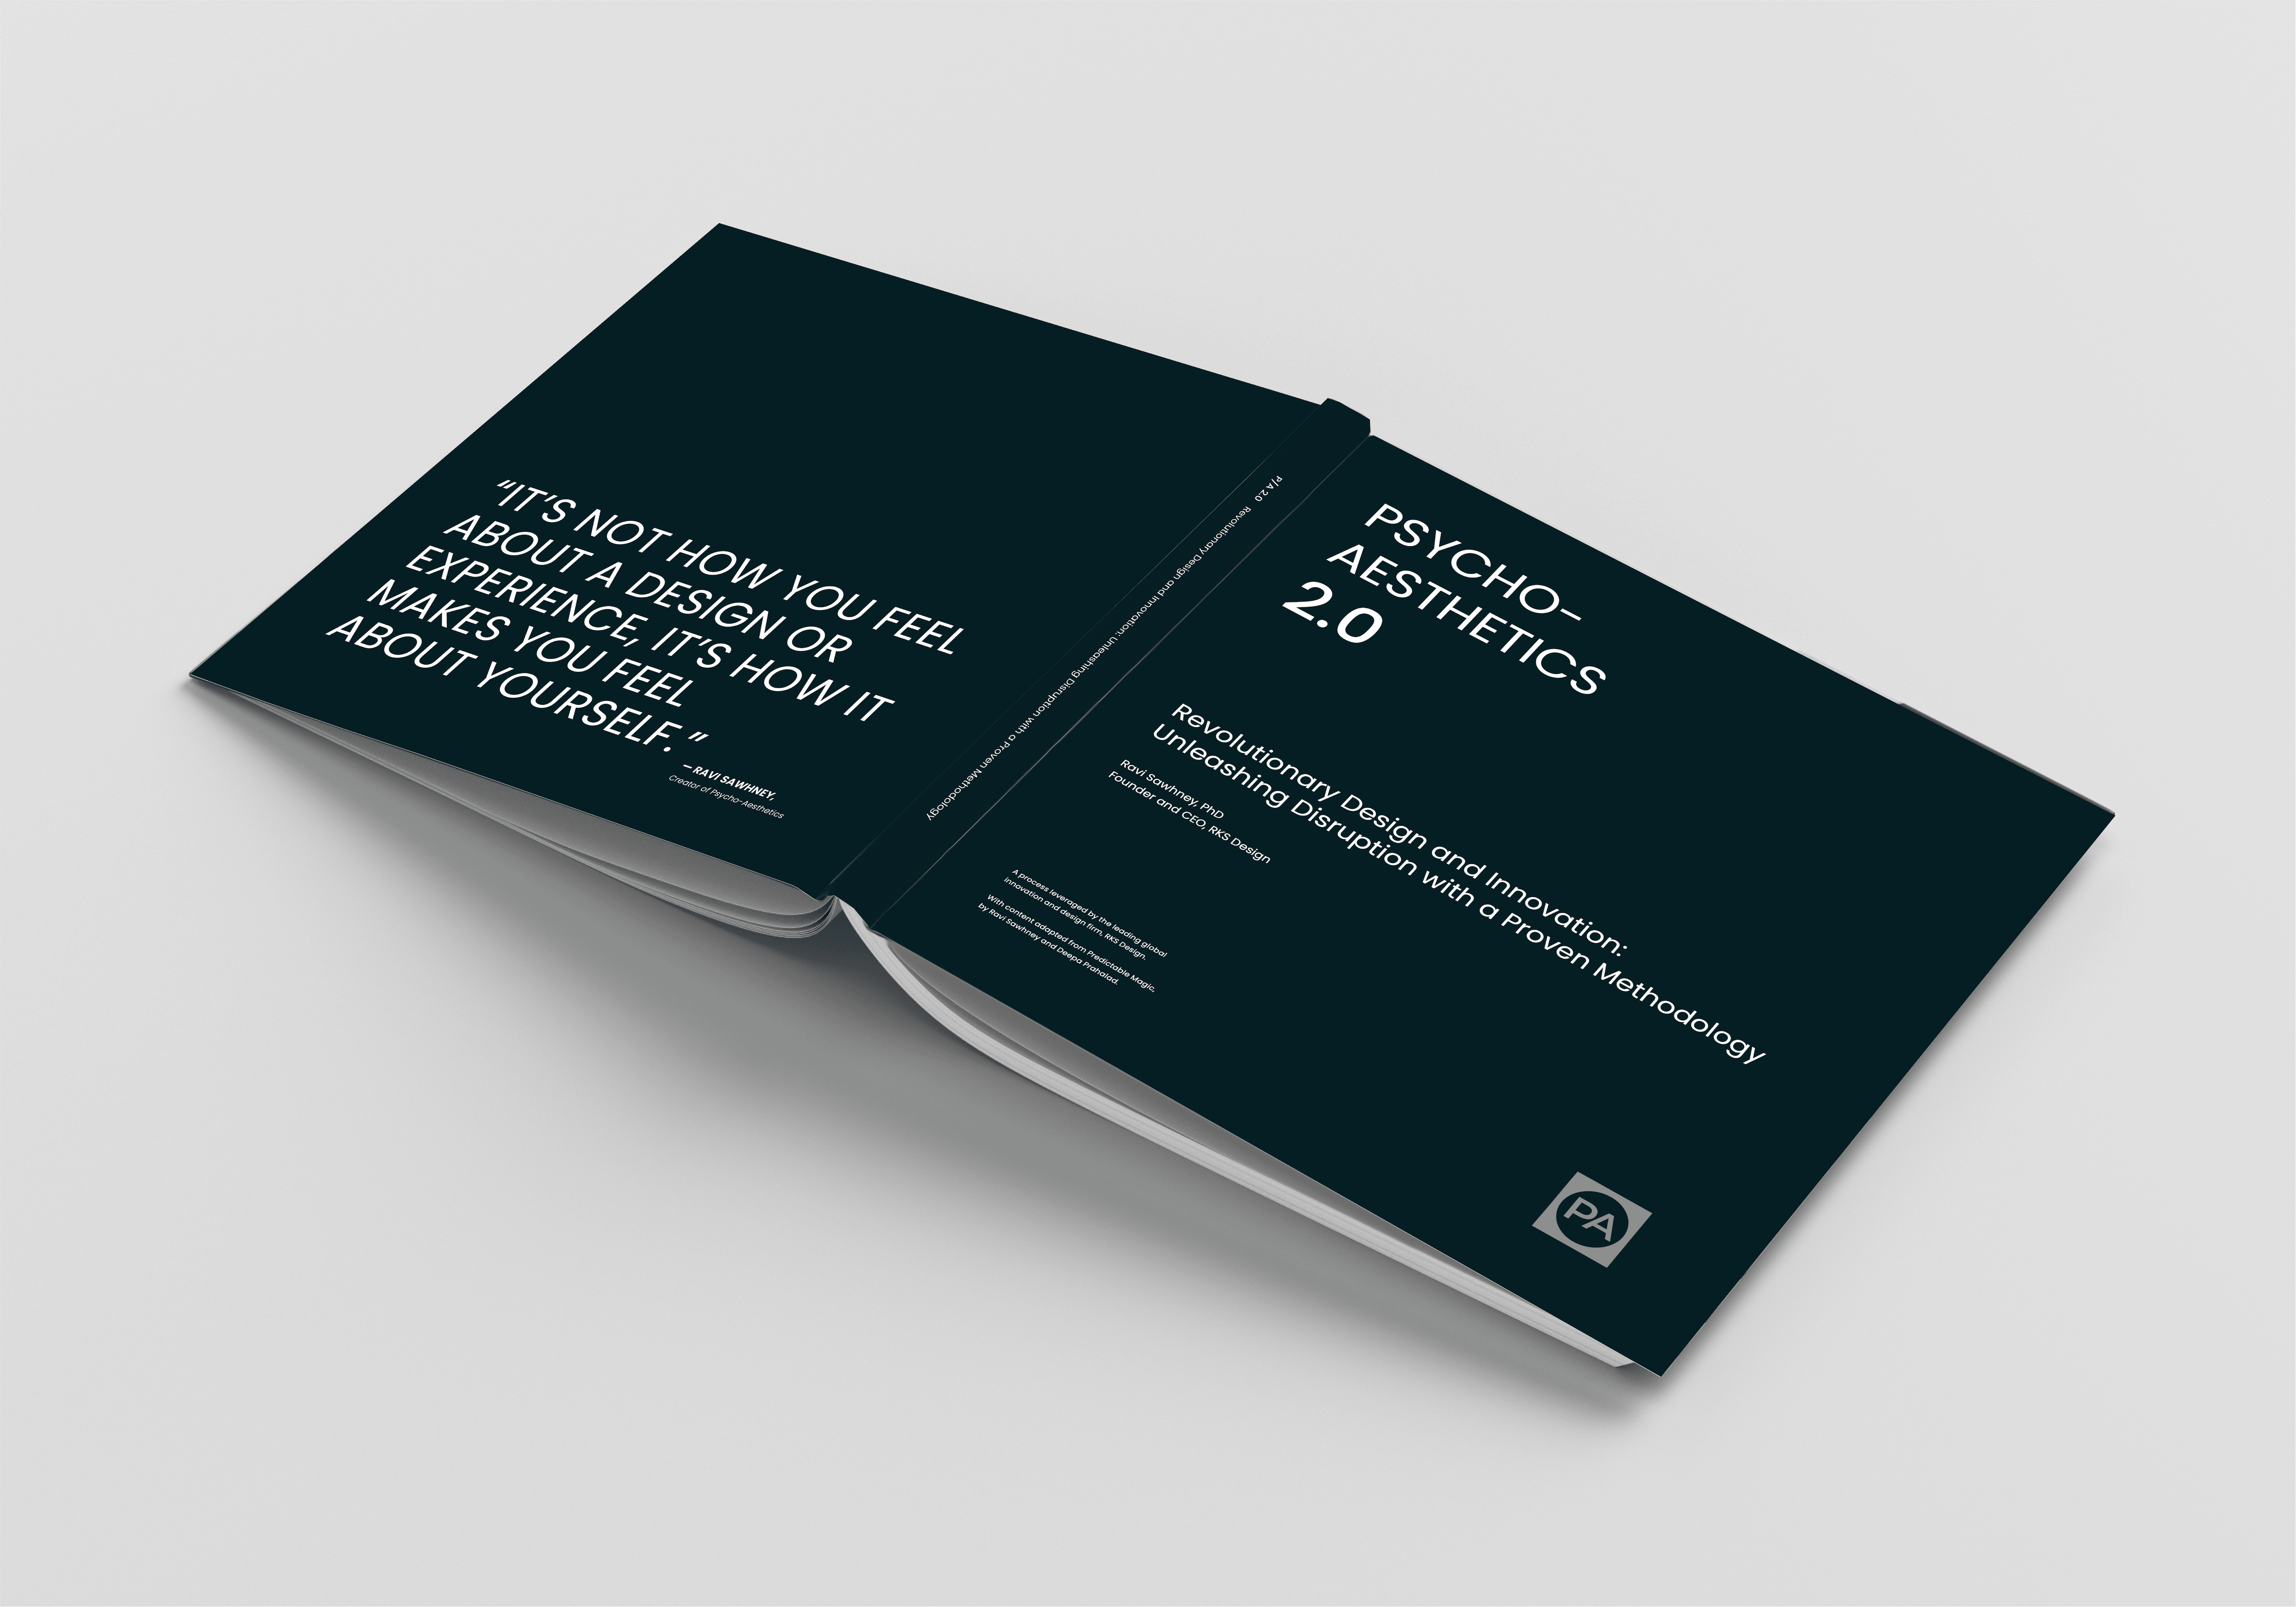 An open book mockup titled 'Psycho-Aesthetics 2.0' with a quote on the left page saying 'It's not how you feel about a design or experience, it's how it makes you feel about yourself.' and the title page on the right